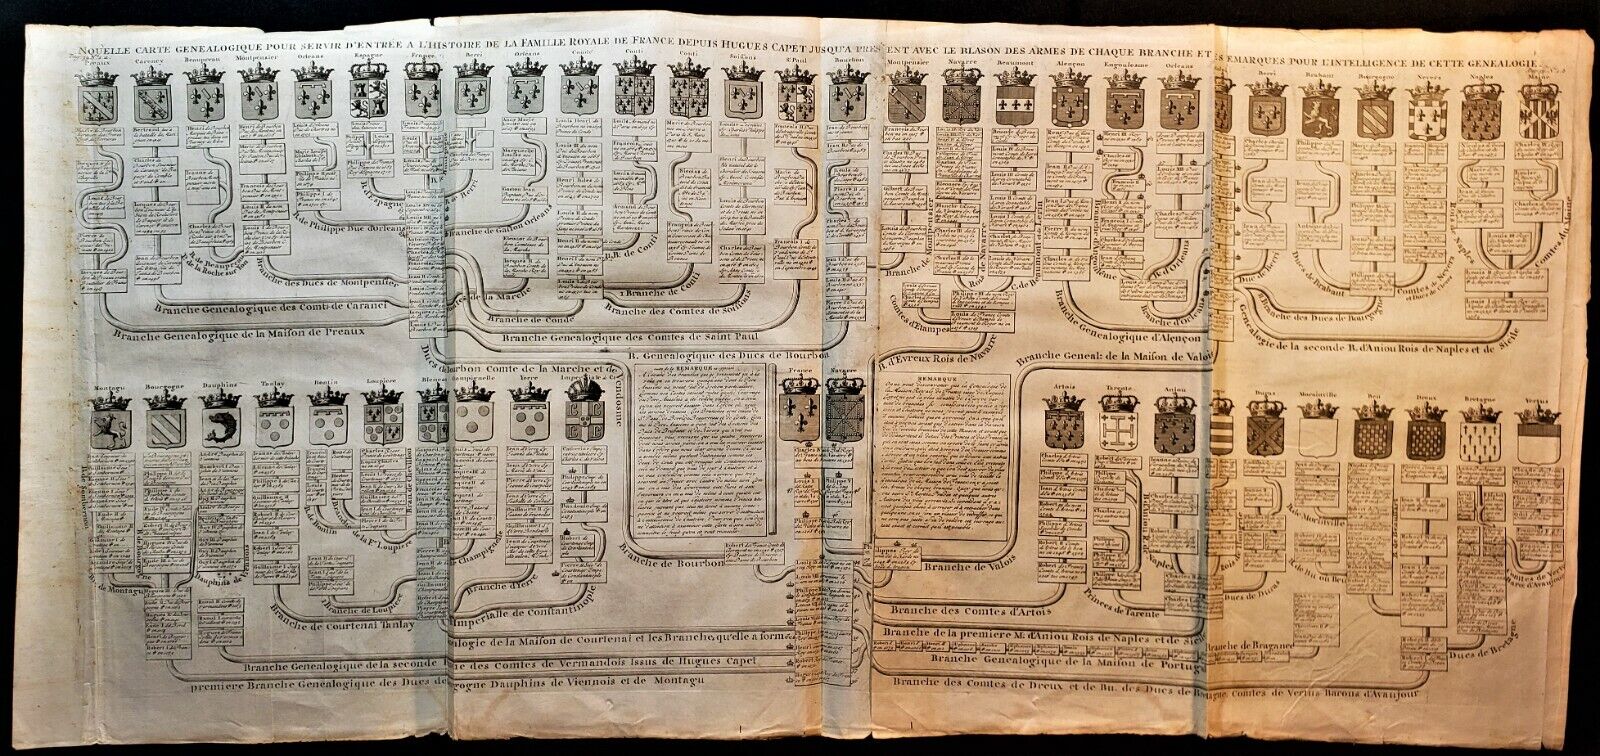 NEW GENEALOGICAL MAP OF THE ROYAL FAMILY OF FRANCE Engraving by Chatelain - 1720